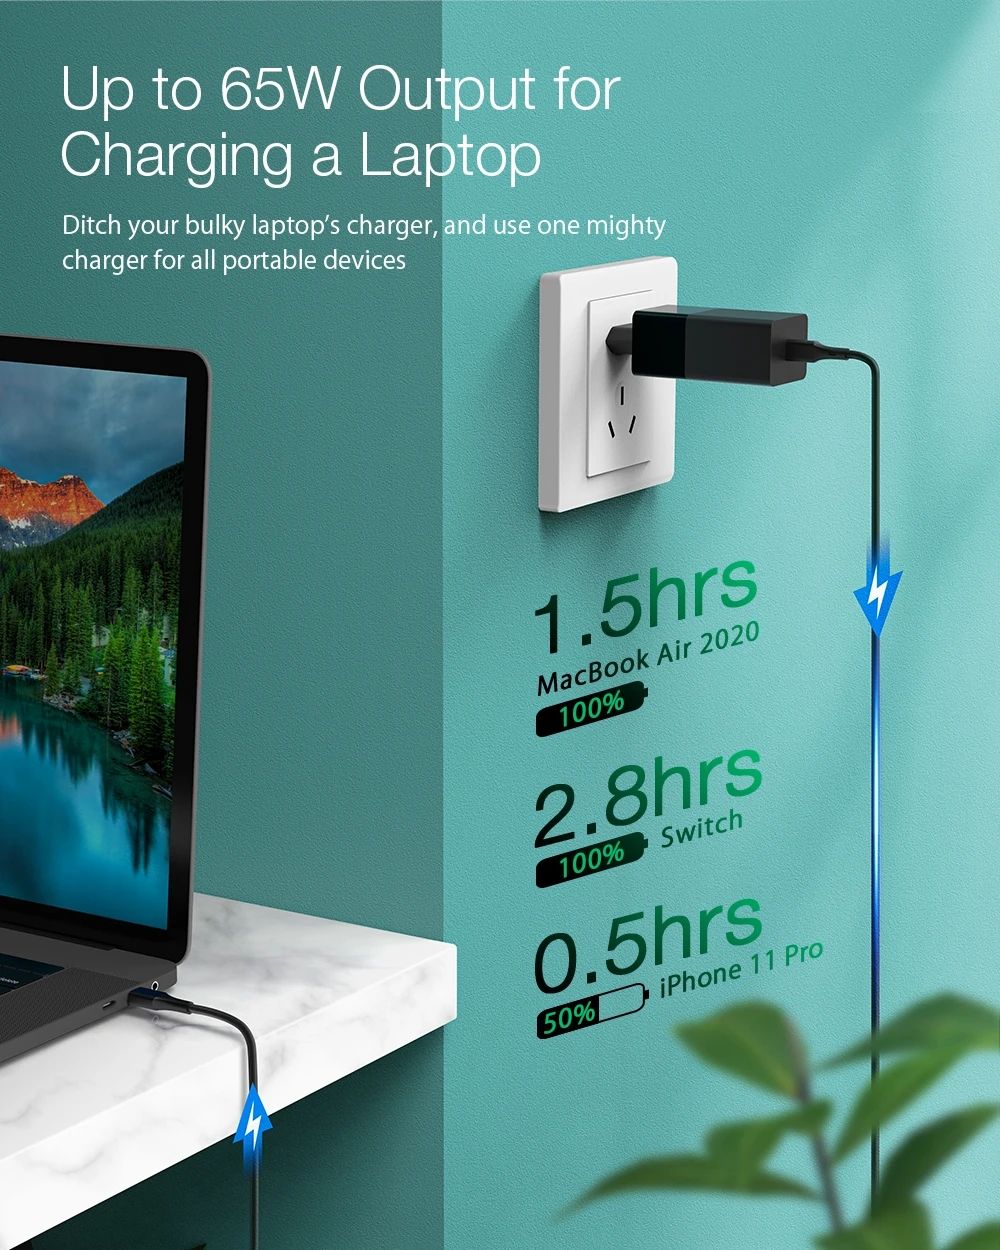 BlitzWolfreg-BW-S17-65W-USB-C-Charger-PD30-Power-Delivery-Wall-Charger-With-EU-Plug-Adapter-With-Bas-1730984